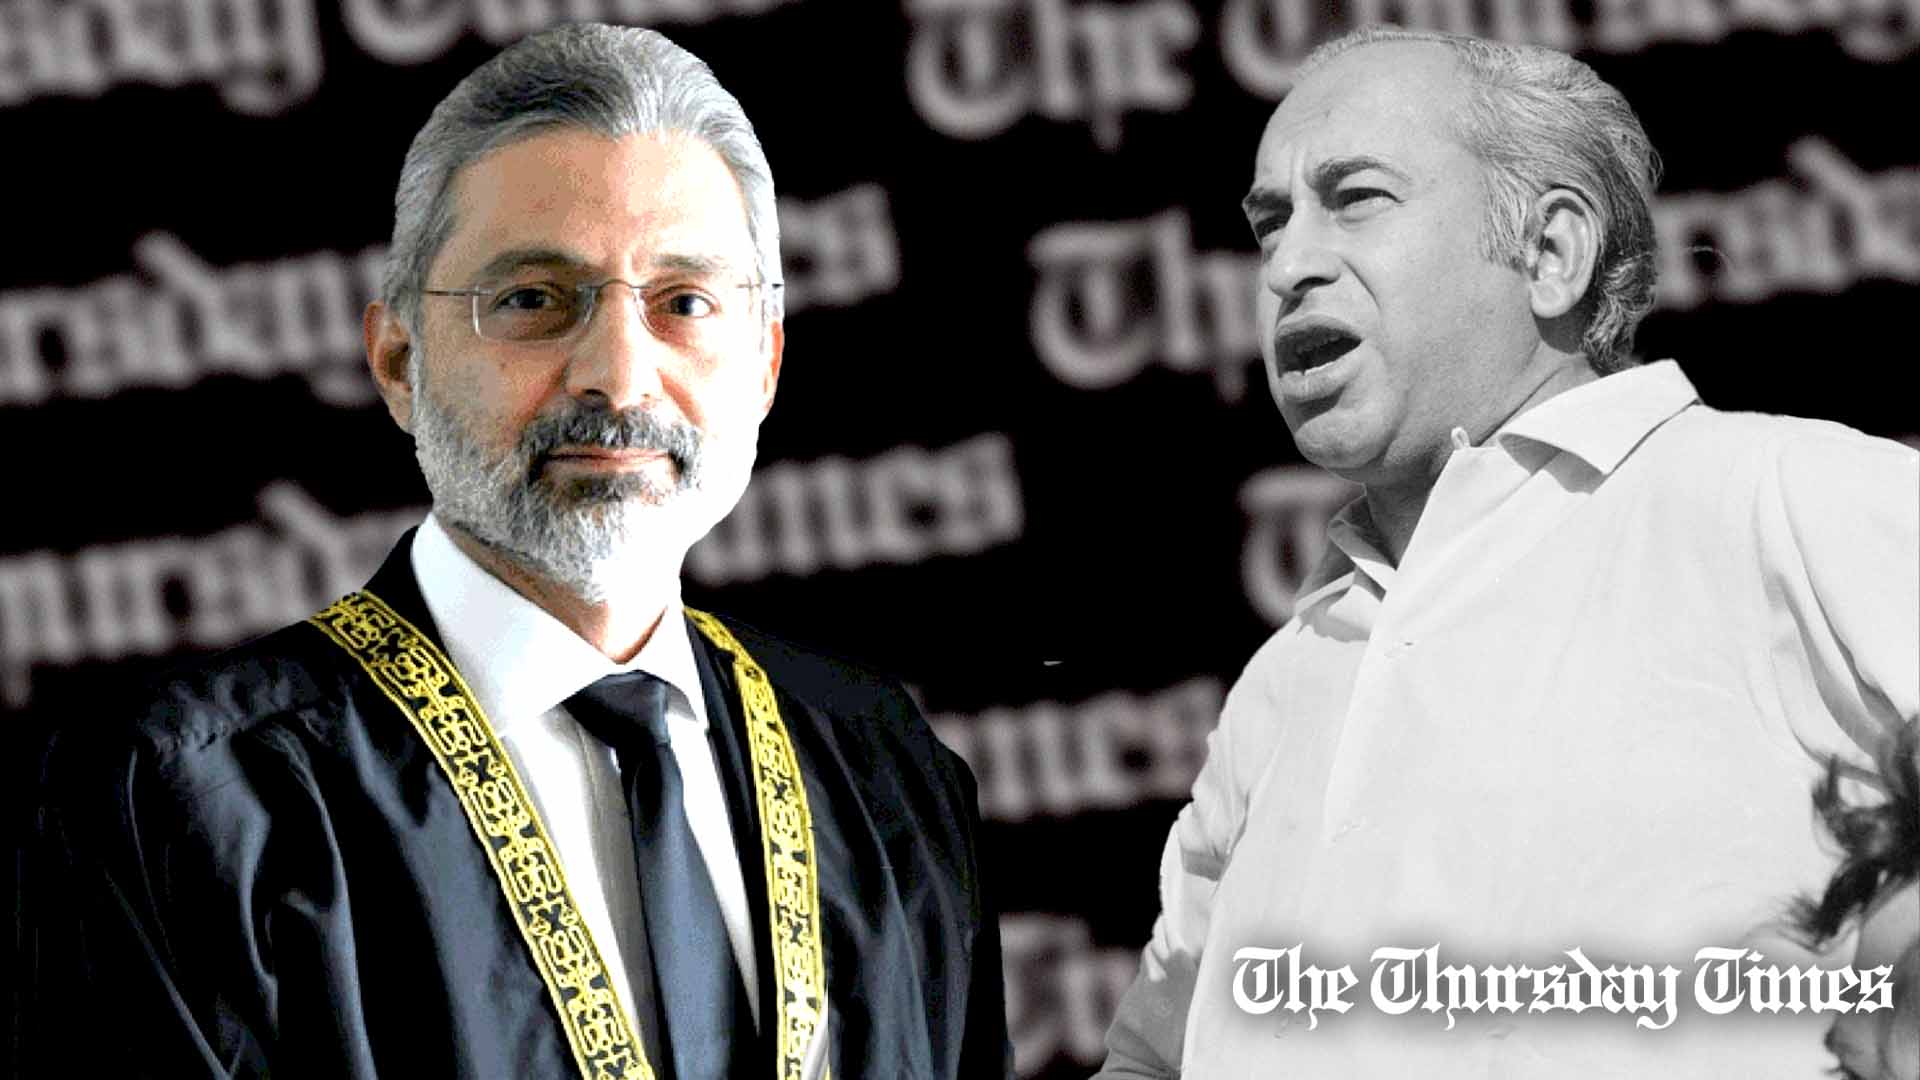 A combined file photo is shown of Chief Justice of Pakistan Qazi Faez Isa (L) and former Pakistani prime minister Zulfikar Ali Bhutto (R). — FILE/THE THURSDAY TIMES